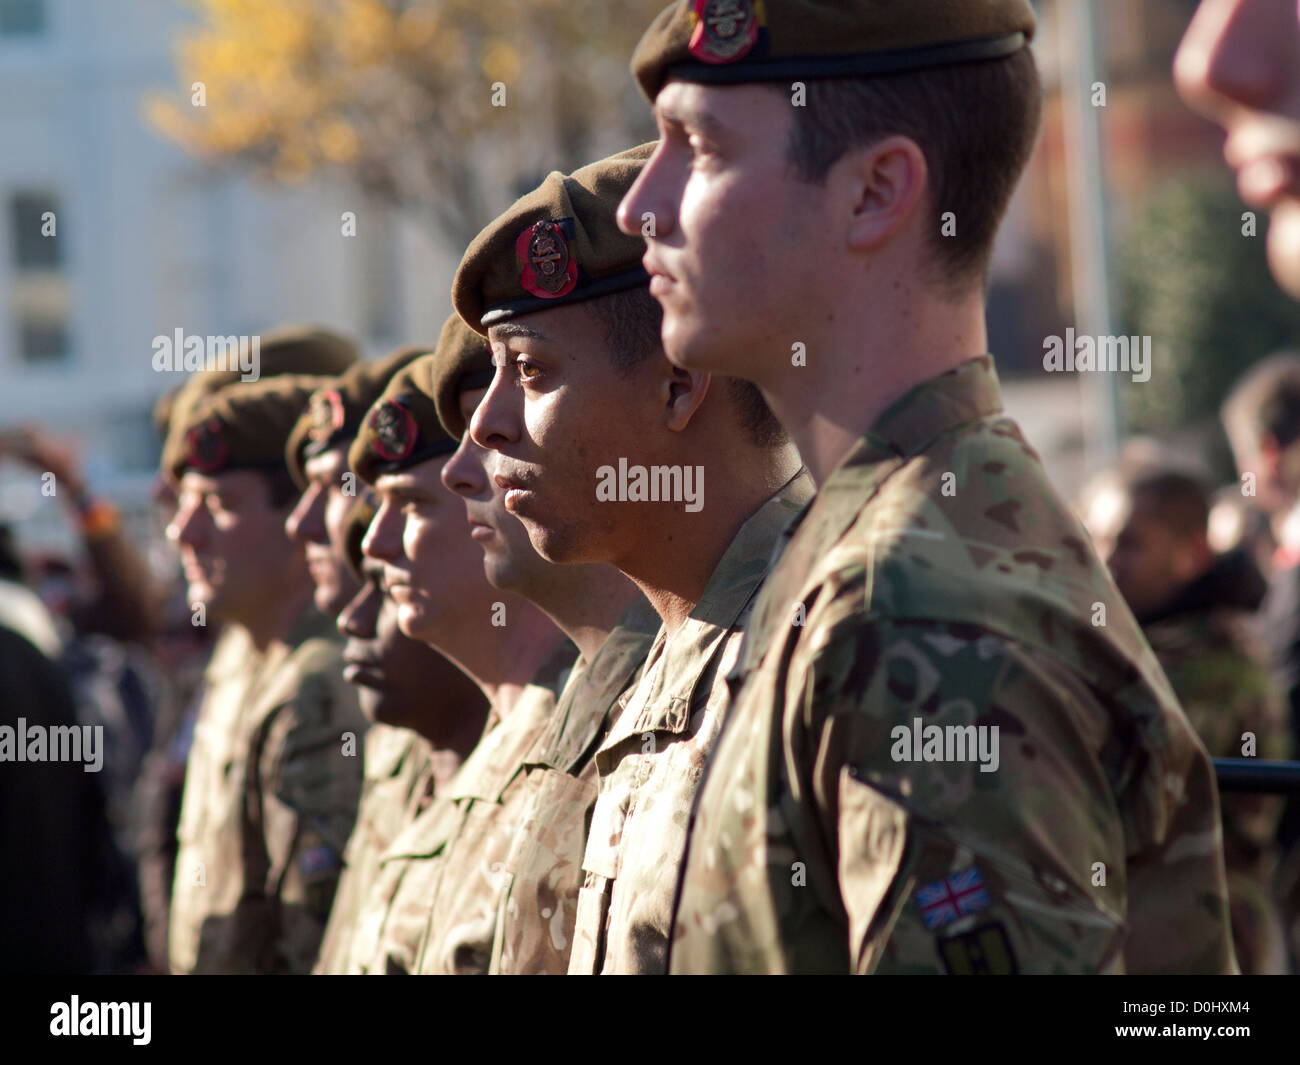 A ceremony to mark Remembrance Day,an event that happens in the UK on November the 11th every year. Stock Photo